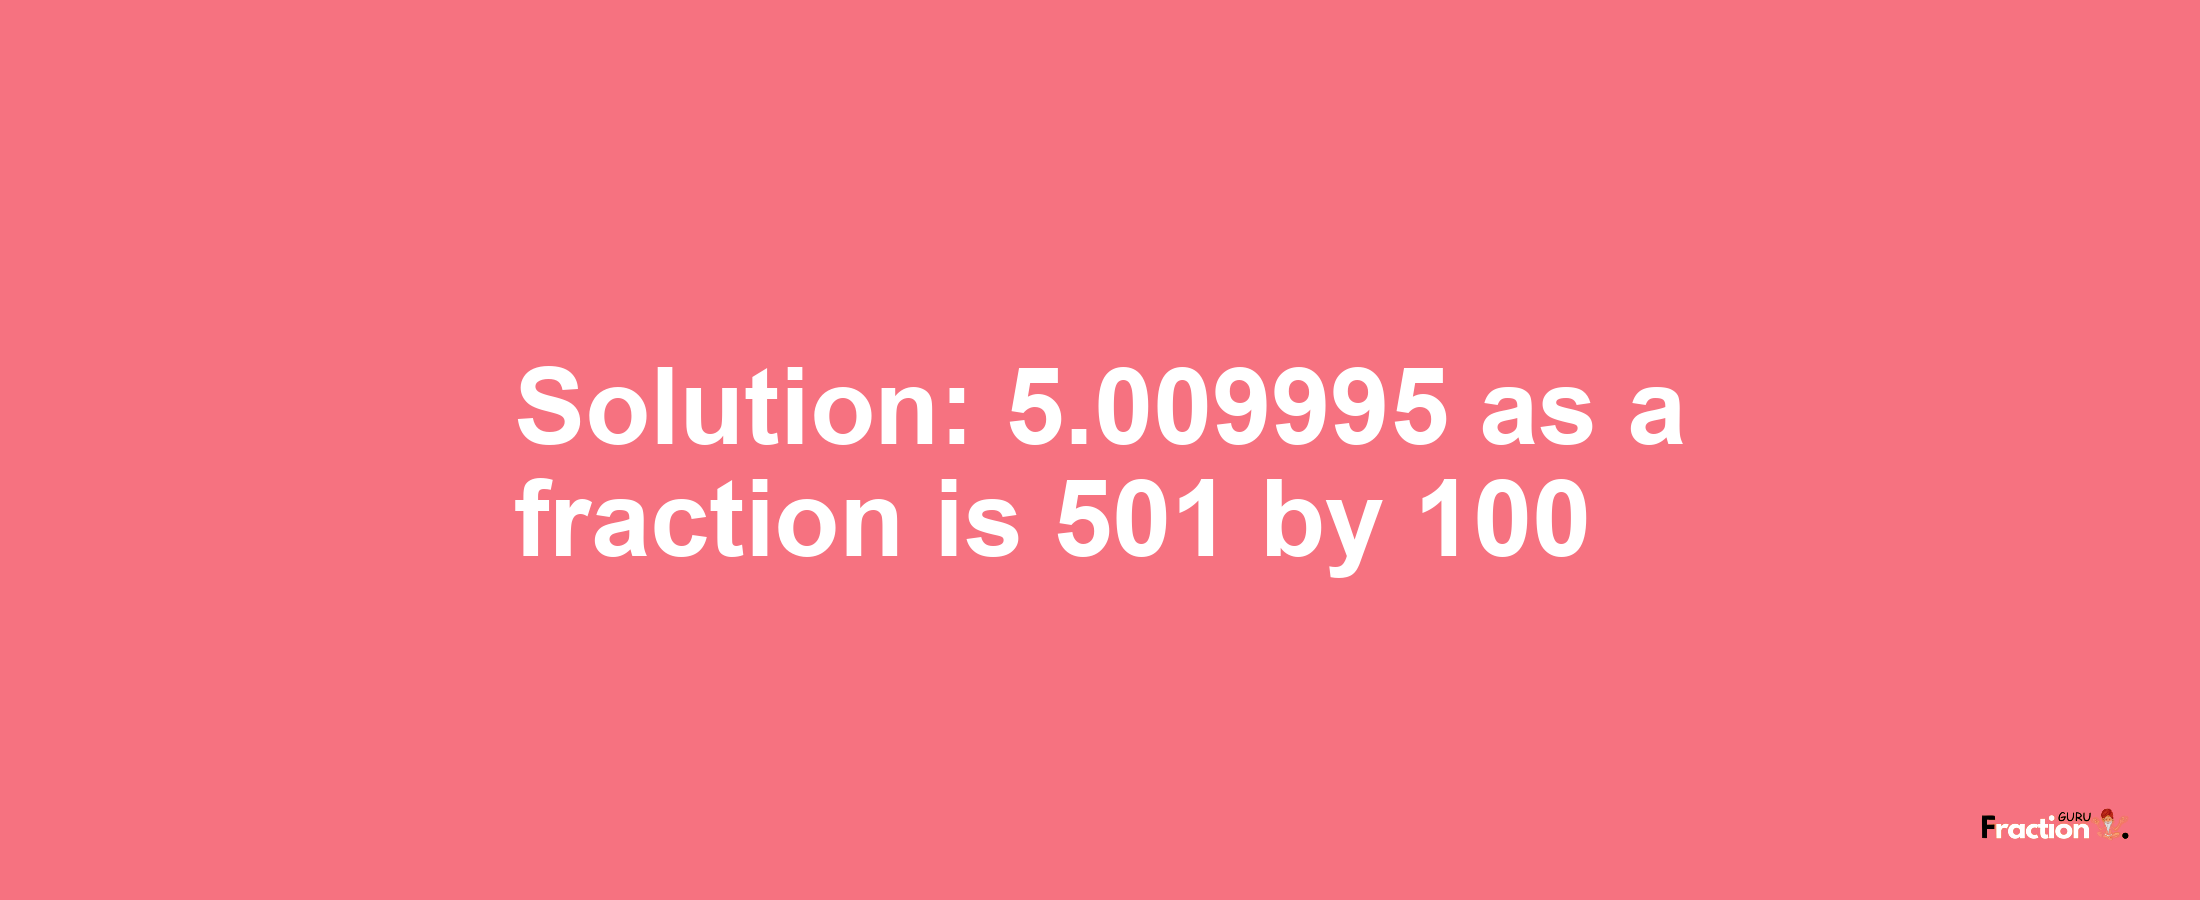 Solution:5.009995 as a fraction is 501/100